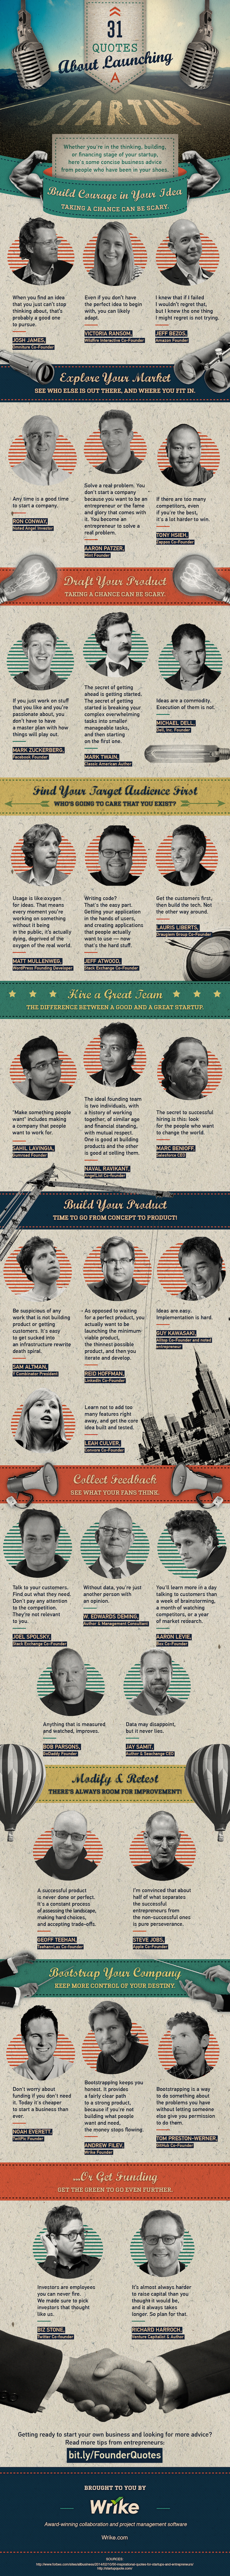 31 Quotes About Launching a Startup (Infographic)